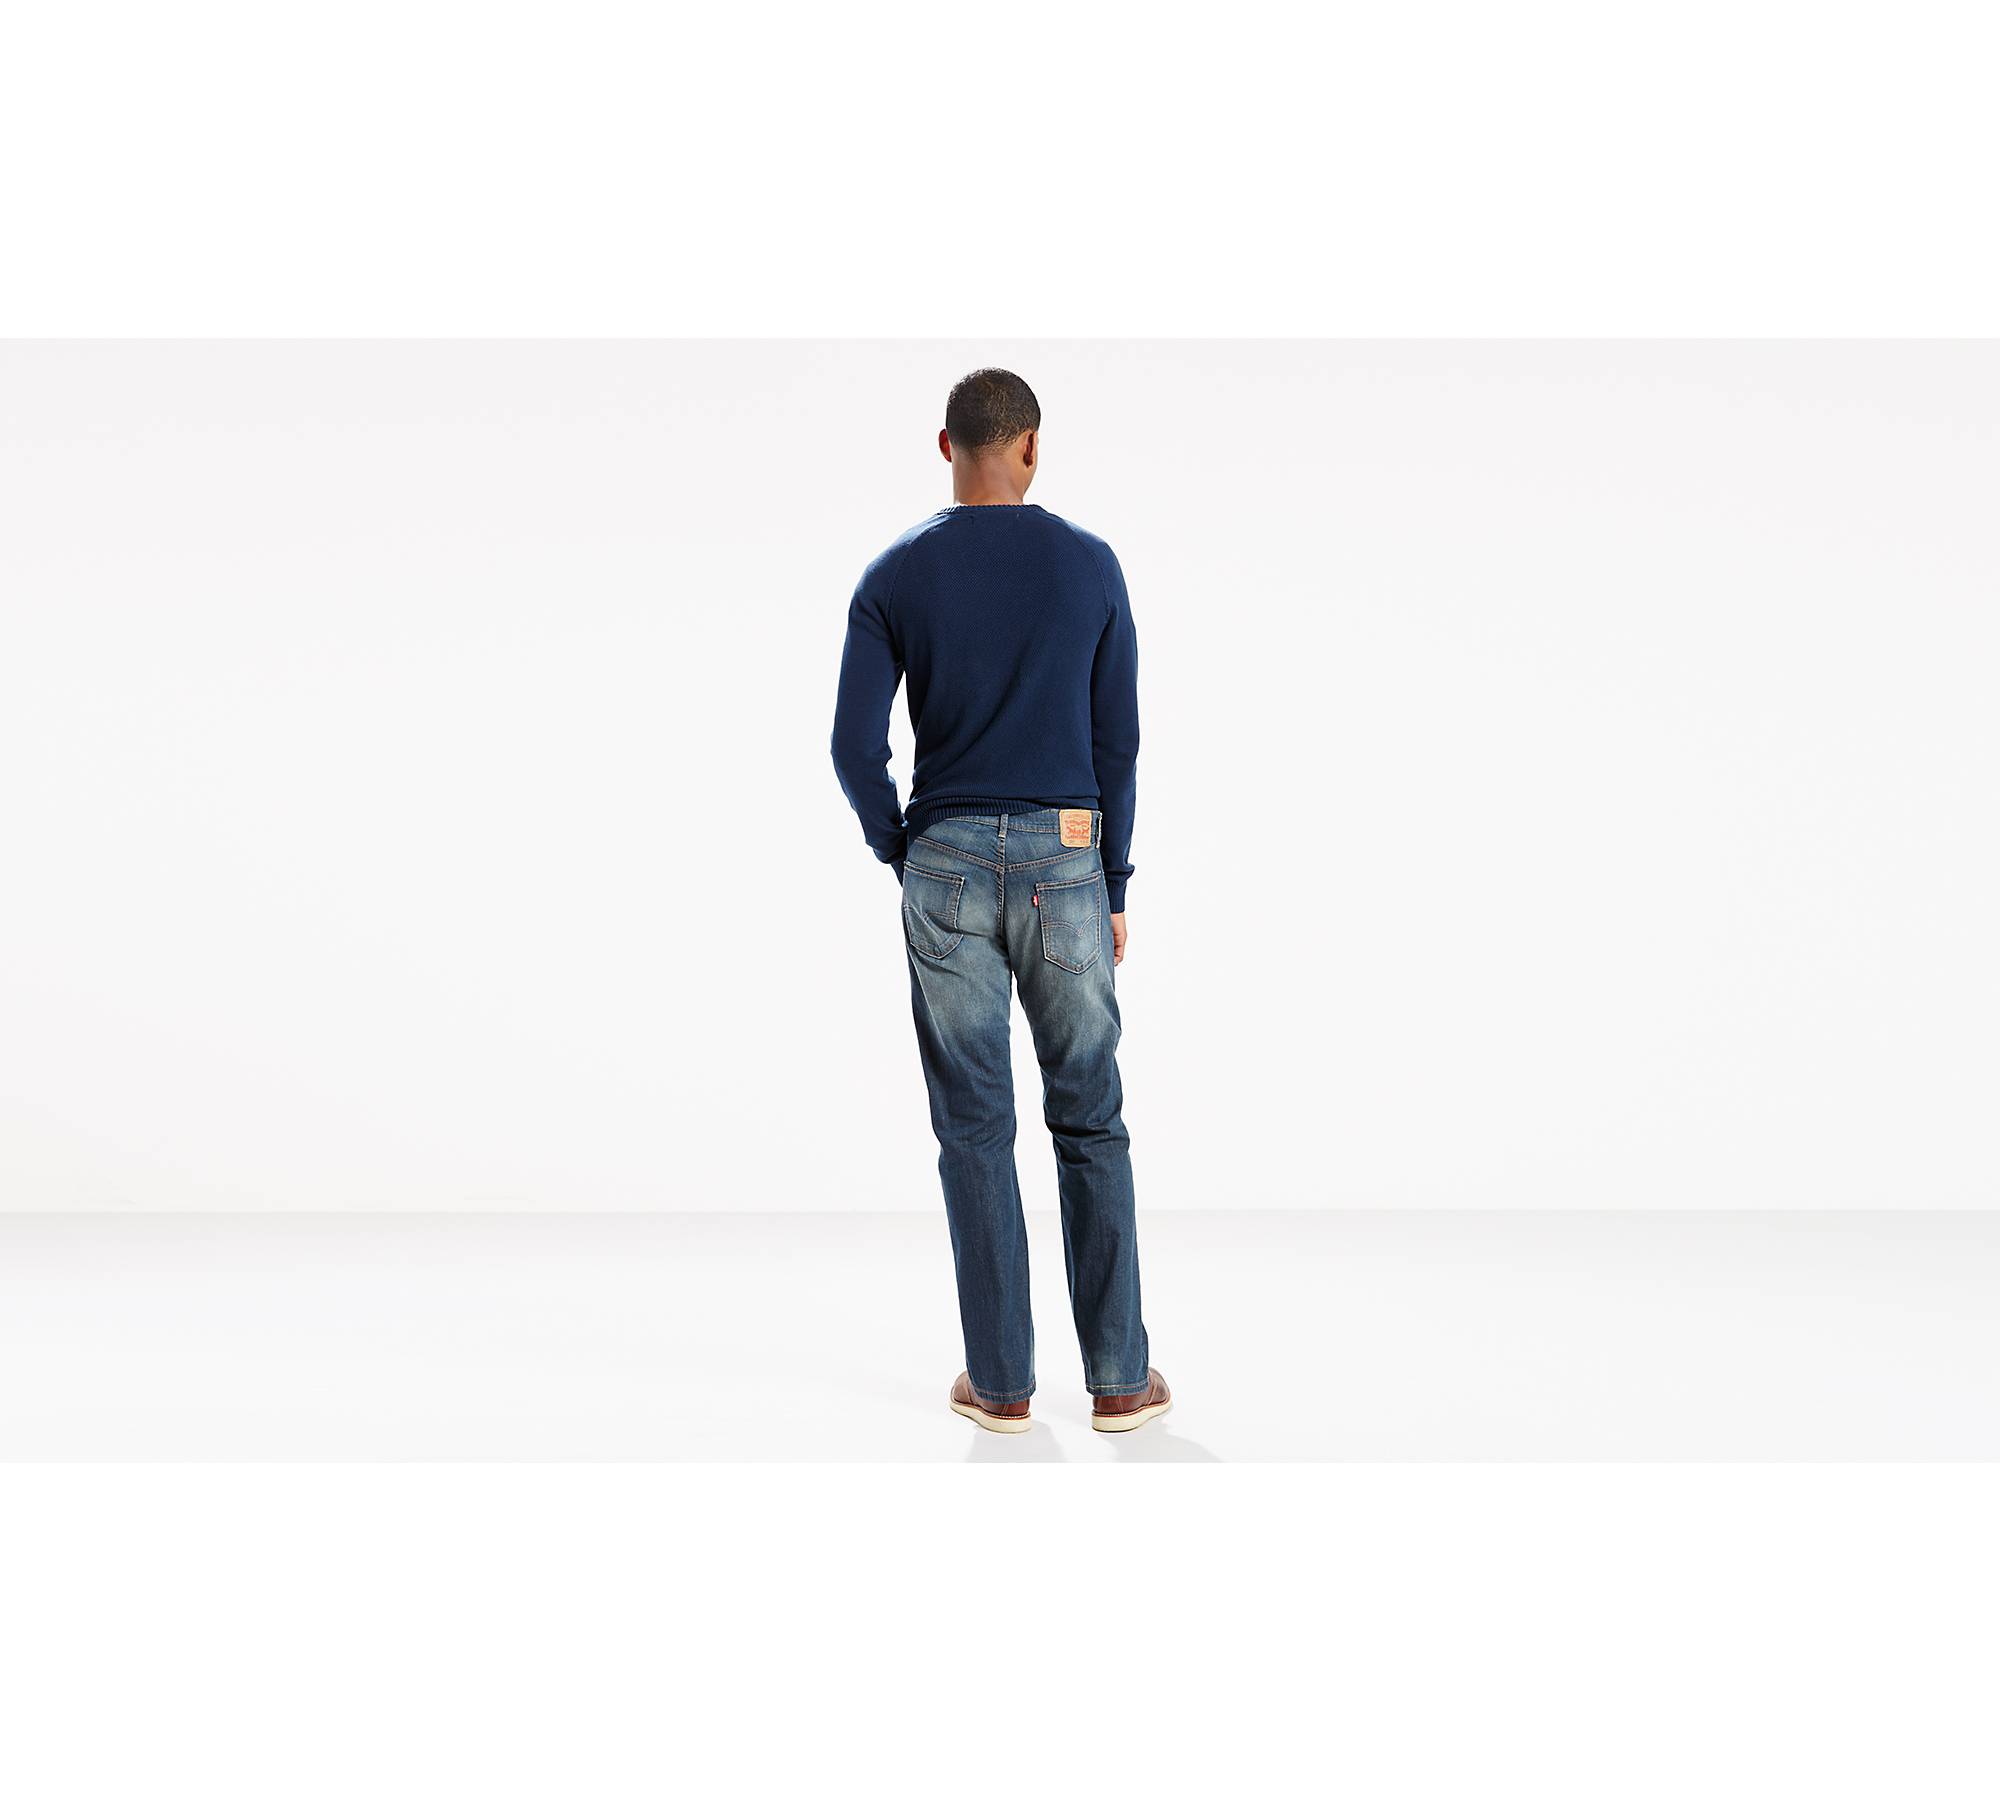 559™ Relaxed Straight Men's Jeans (big & Tall) - Medium Wash | Levi's® US